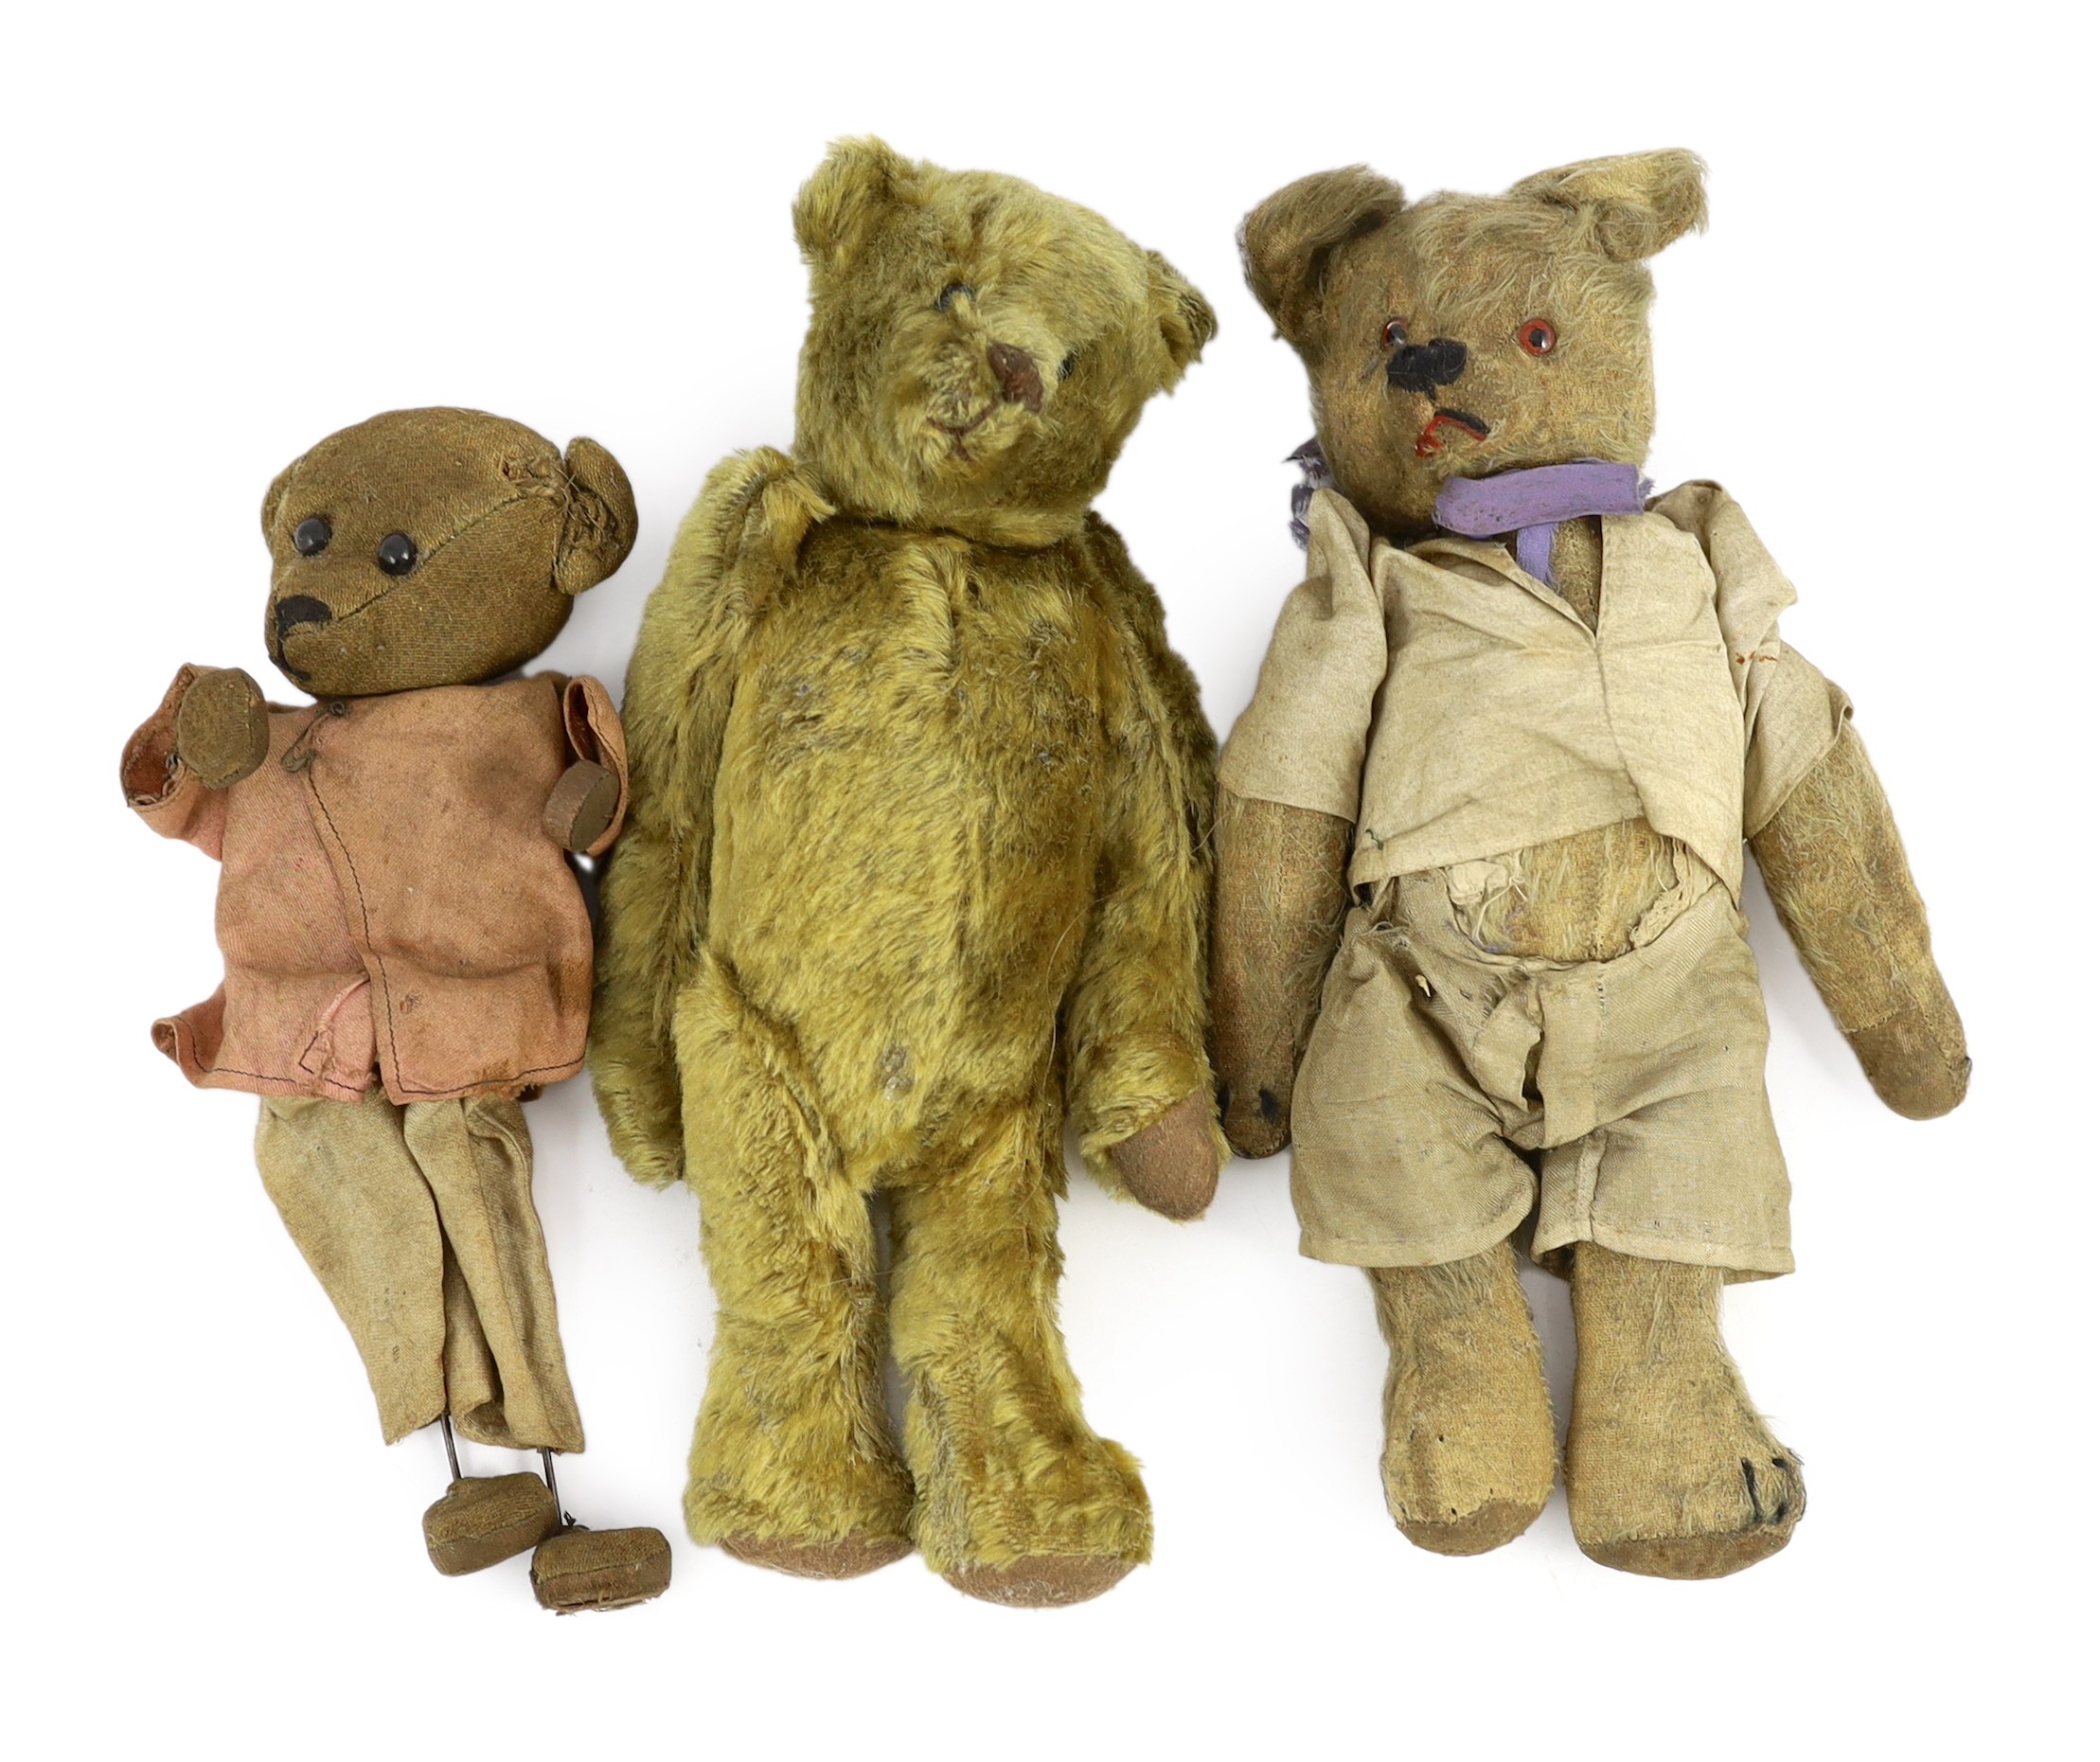 An early 20th century German Teddy bear, mohair plush and boot-button eyes, 12in., and two other Teddy bears                                                                                                                